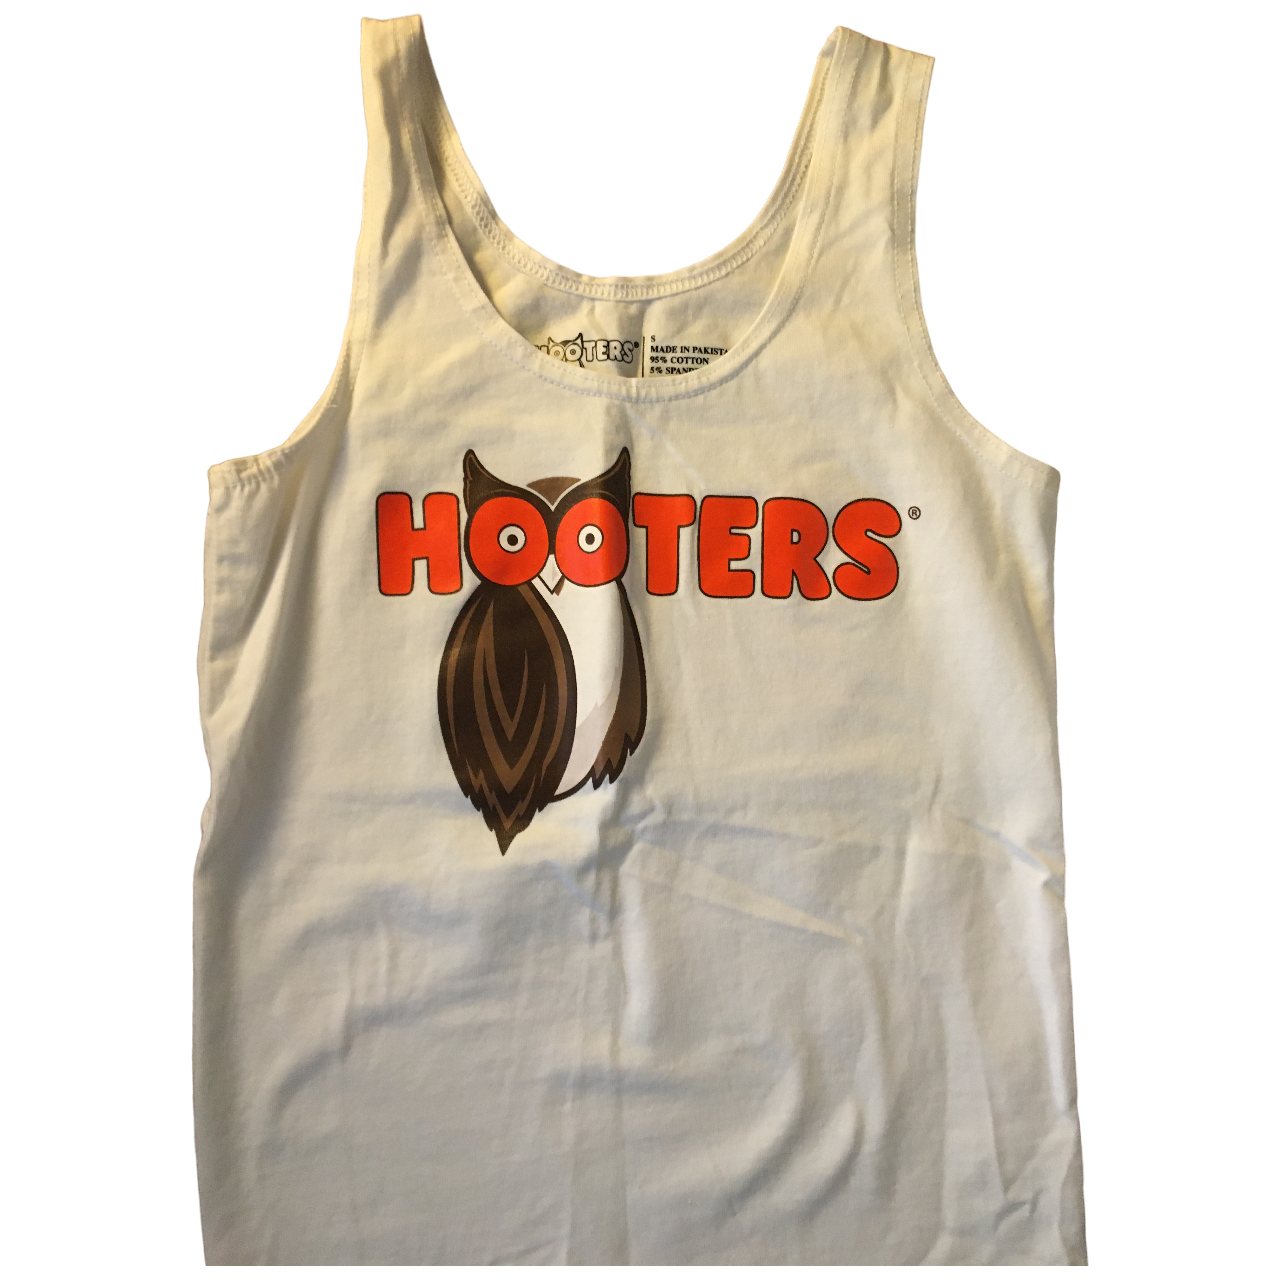 Hooters Women's Outfit Costume New Logo White Tank Top